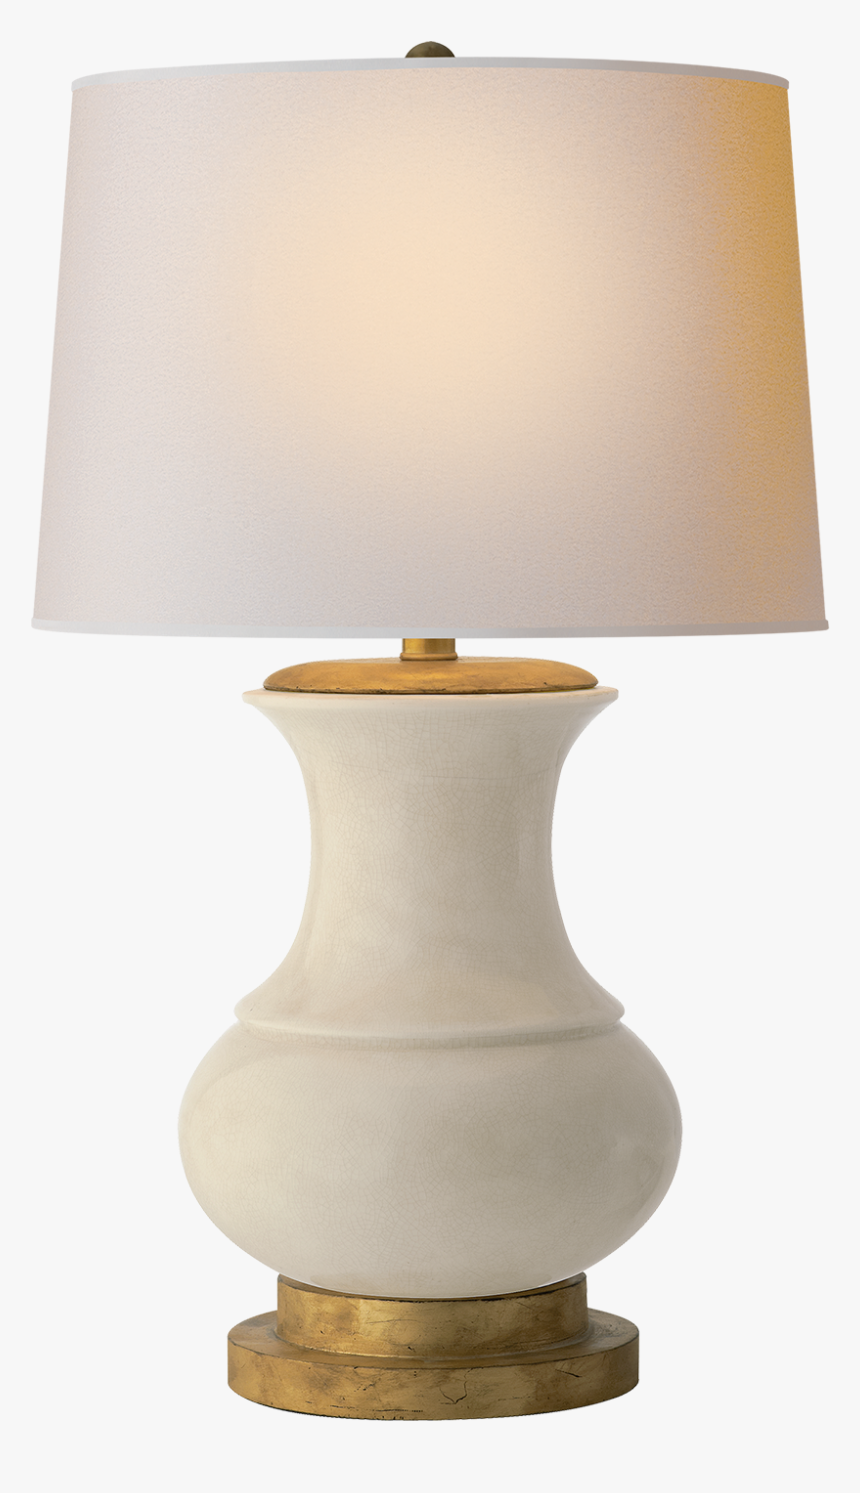 Deauville Table Lamp In Tea Stain Porcelain With Natural - Visual Comfort Table Lamps, HD Png Download, Free Download